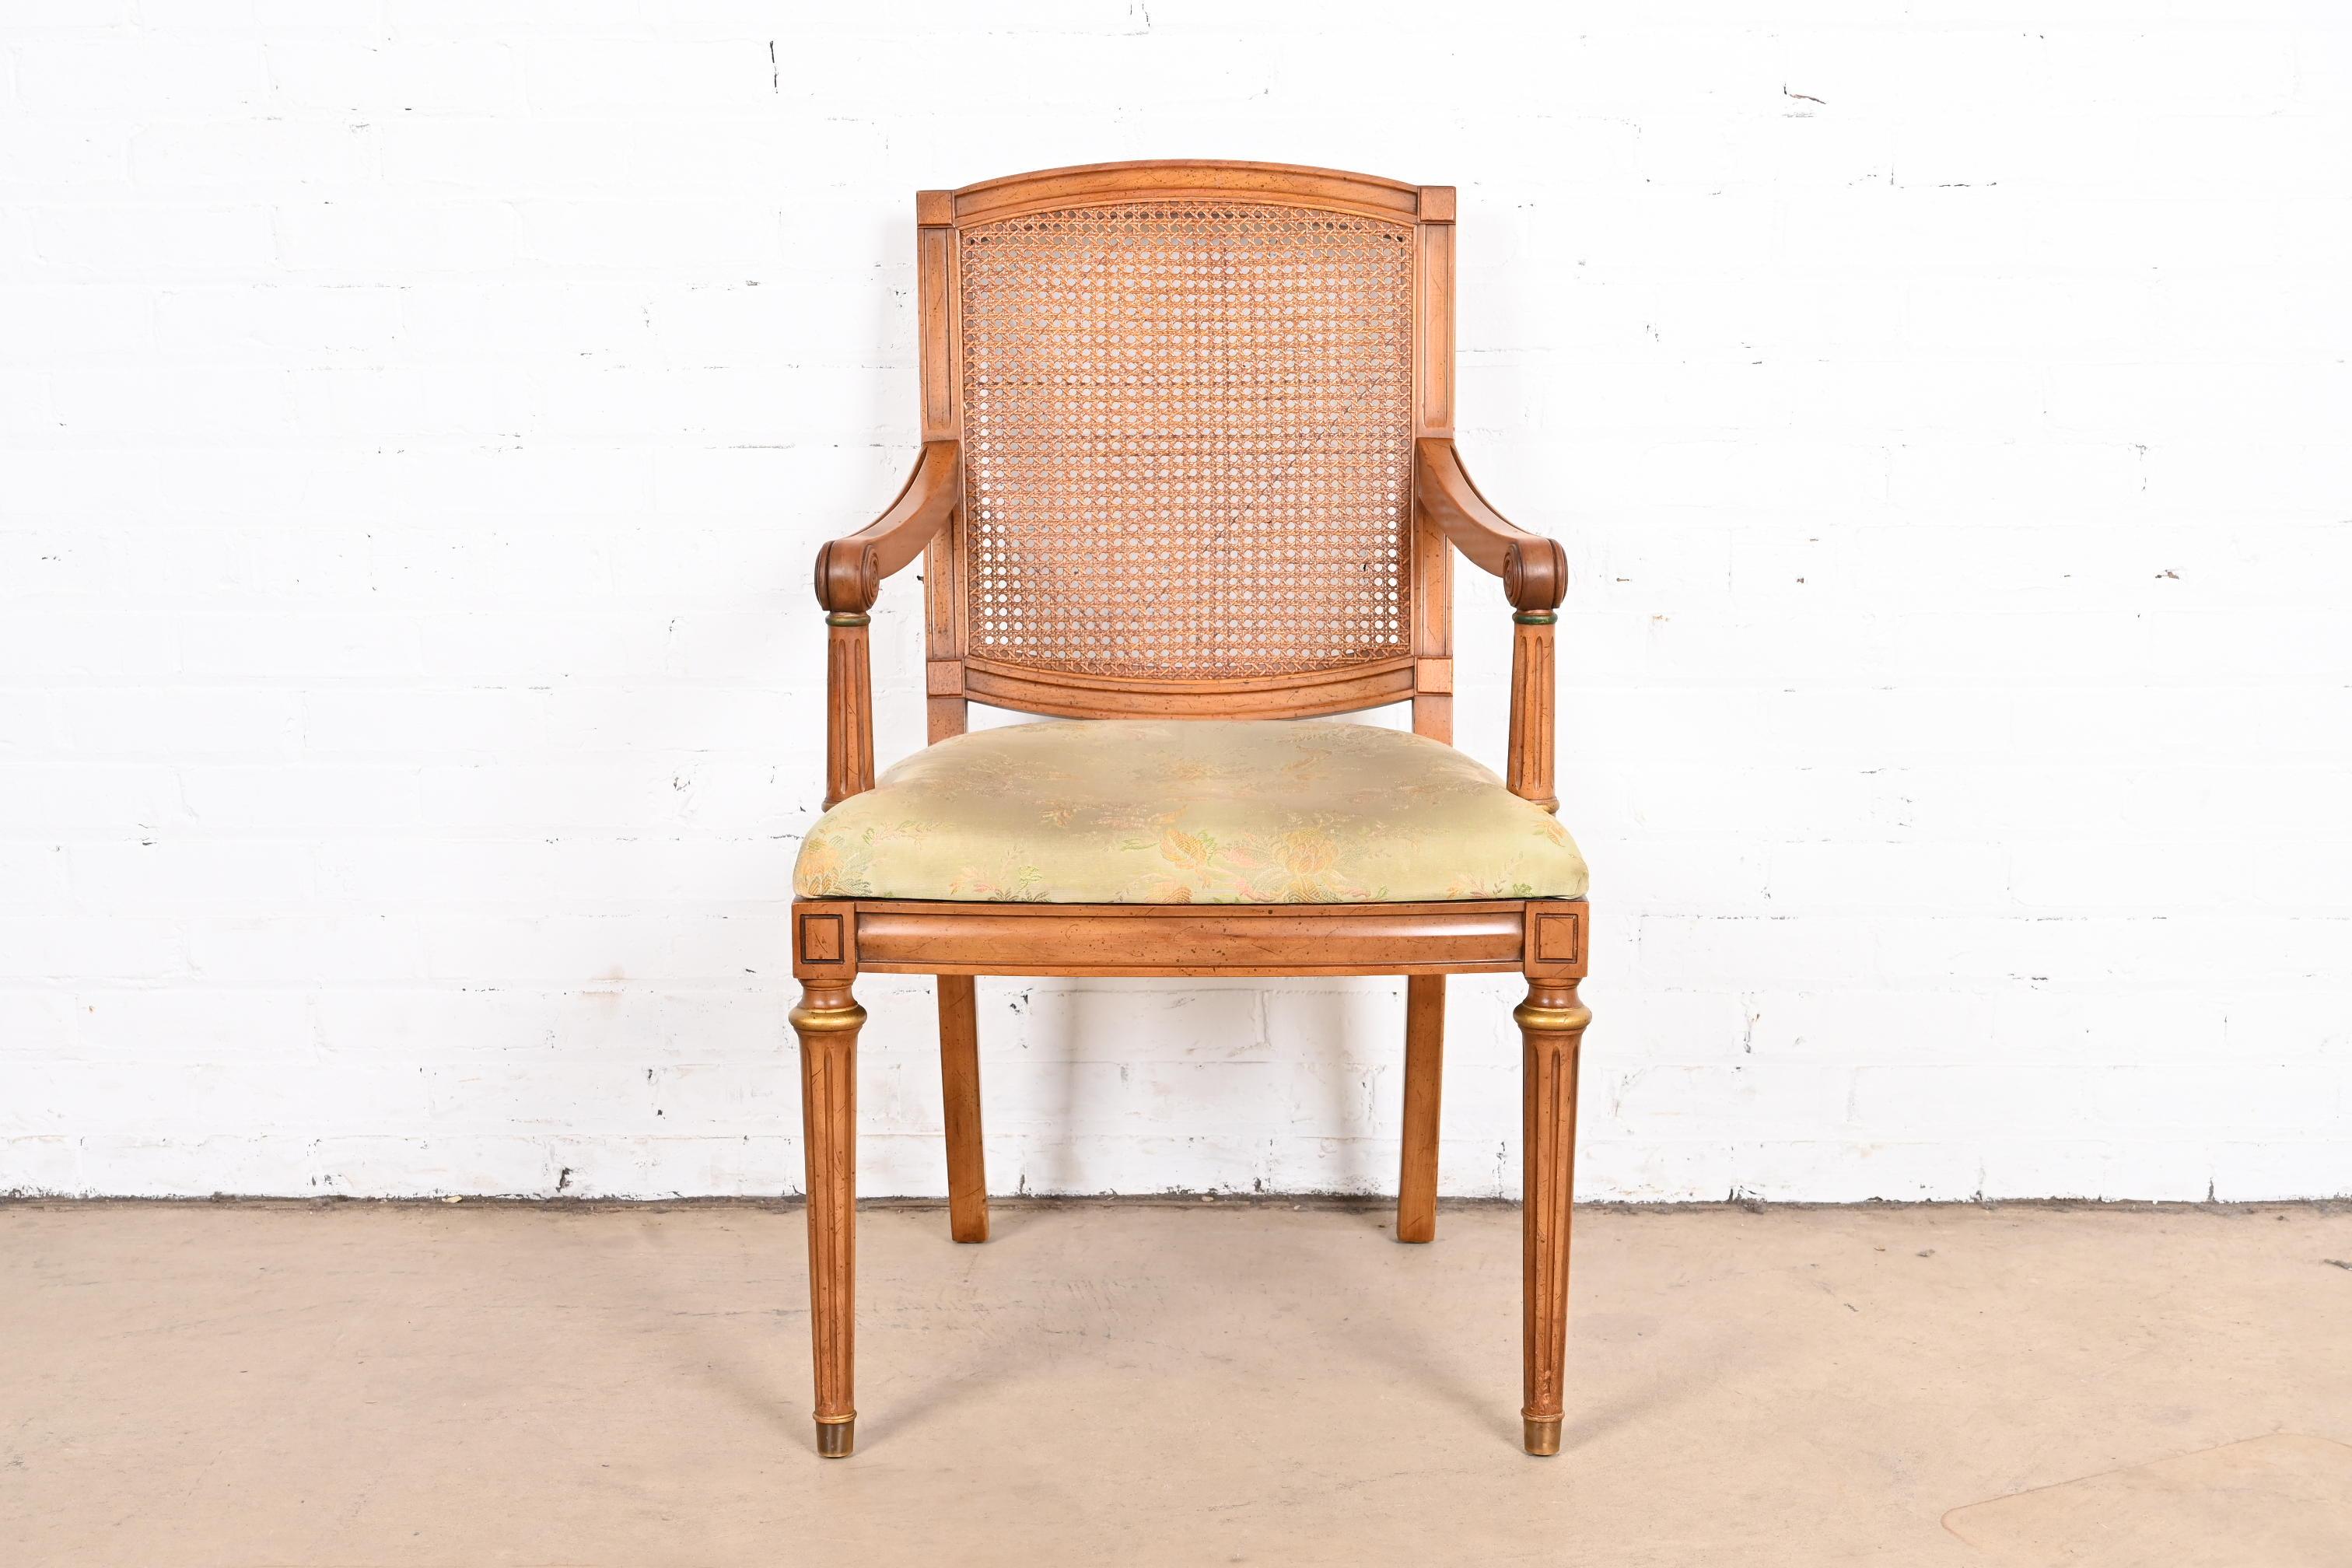 A gorgeous French Regency Louis XVI style armchair

By Henredon

USA, circa 1960s

Sculpted cherry wood frame, with caned seat back, upholstered seat, gold gilt details, and brass-capped feet.

Measures: 22.25